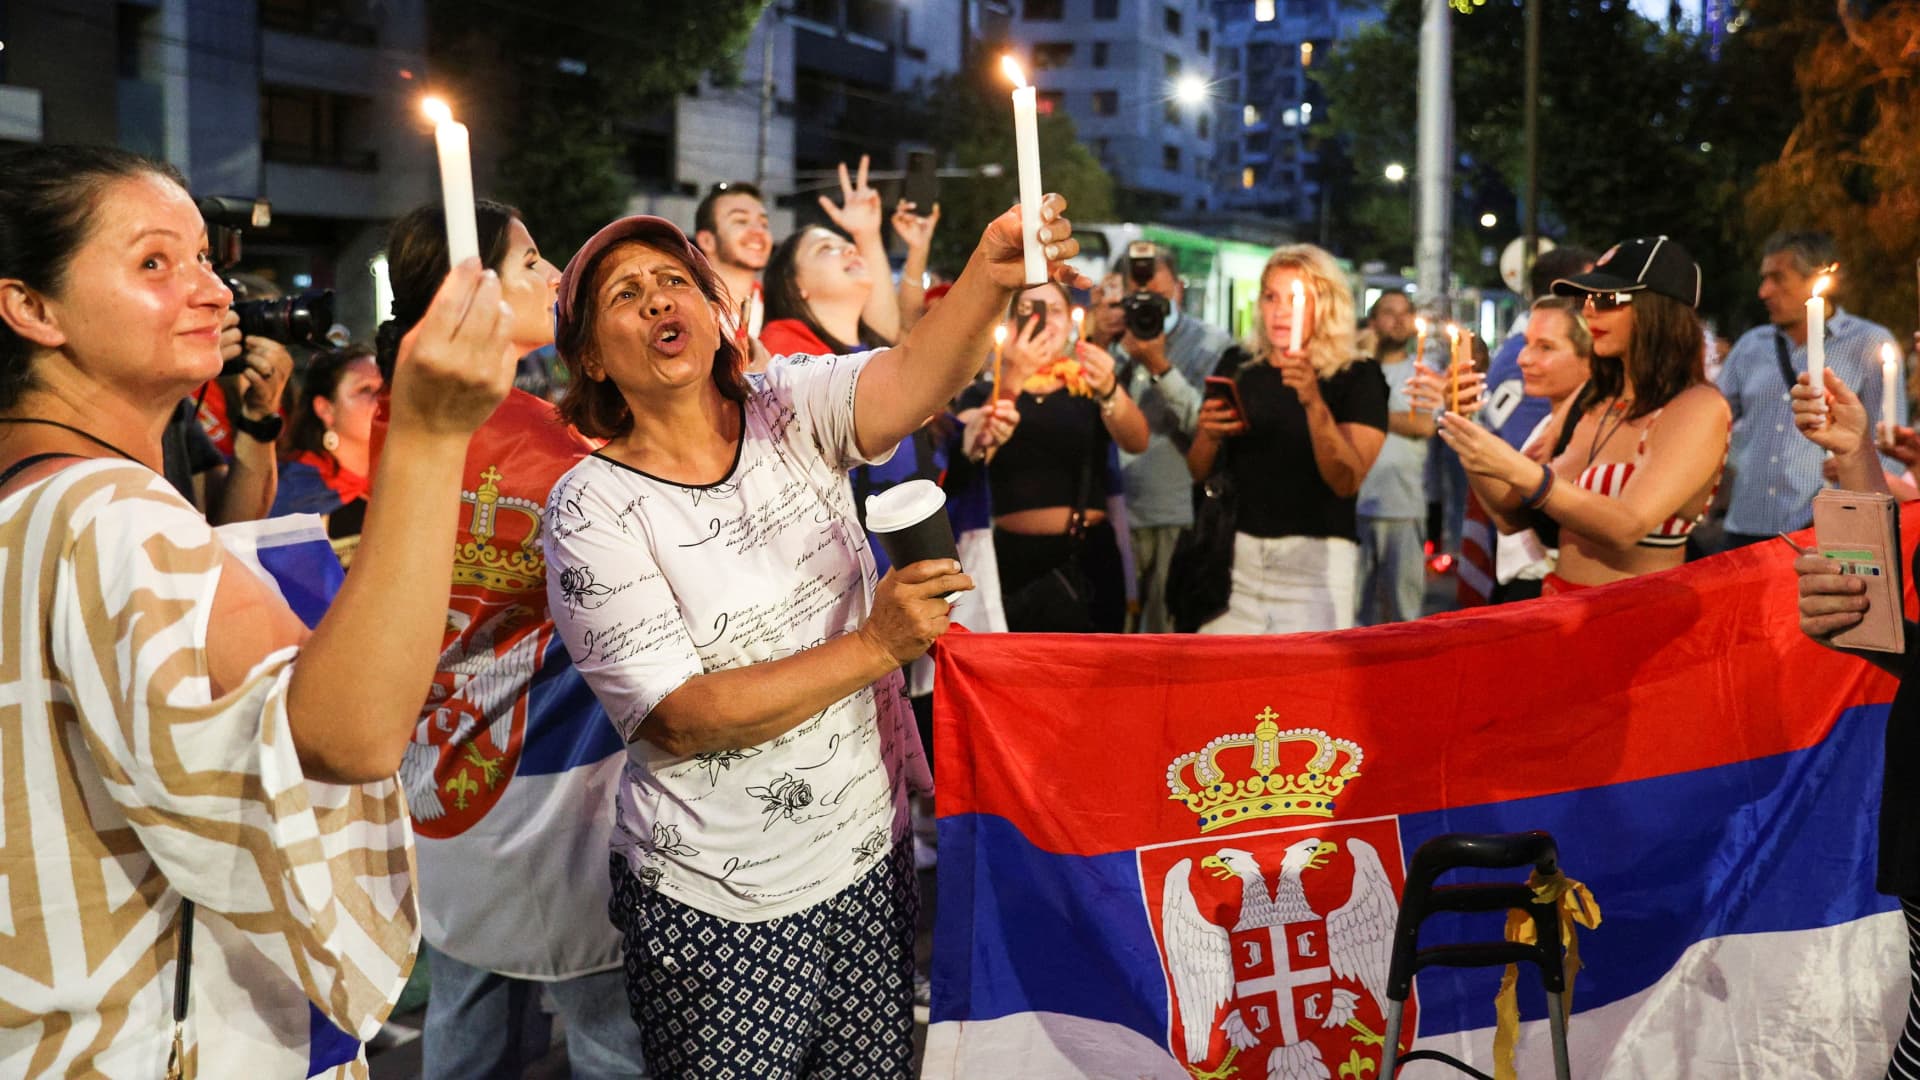 Supporters of Serbian tennis player Novak Djokovic rally outside the Park Hotel, where the star athlete is believed to be held while he stays in Australia, in Melbourne, Australia, January 6, 2022.